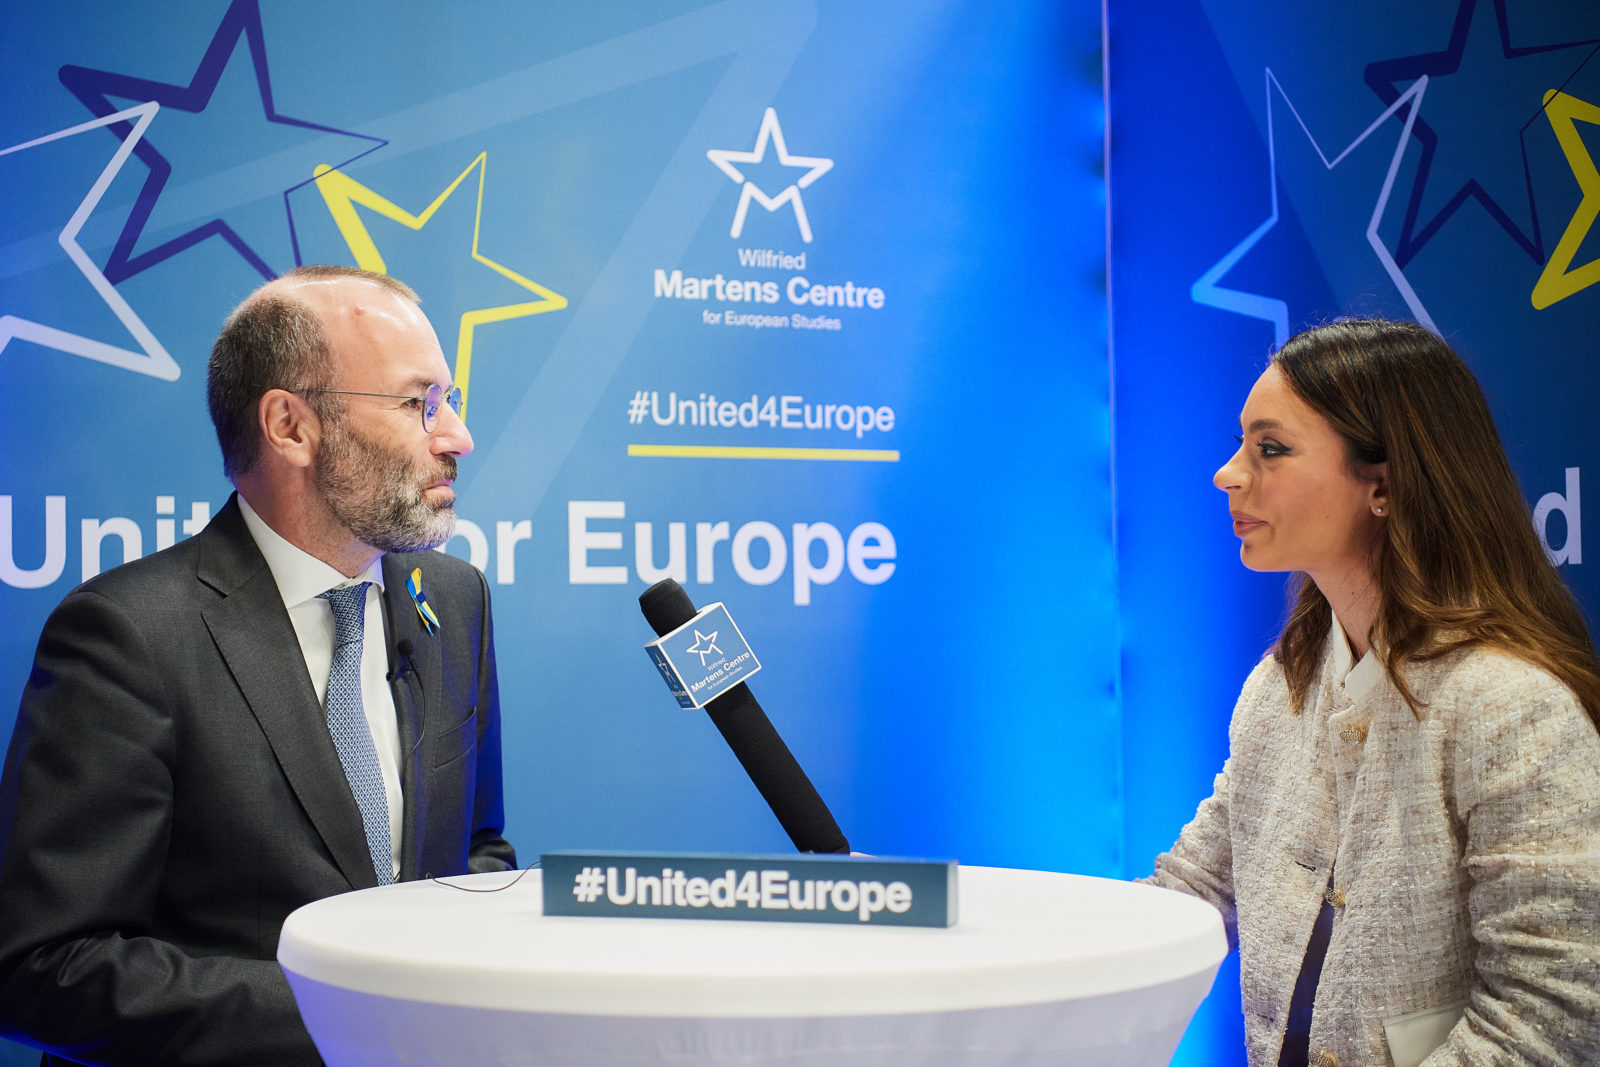 Interview with Manfred Weber, EPP President